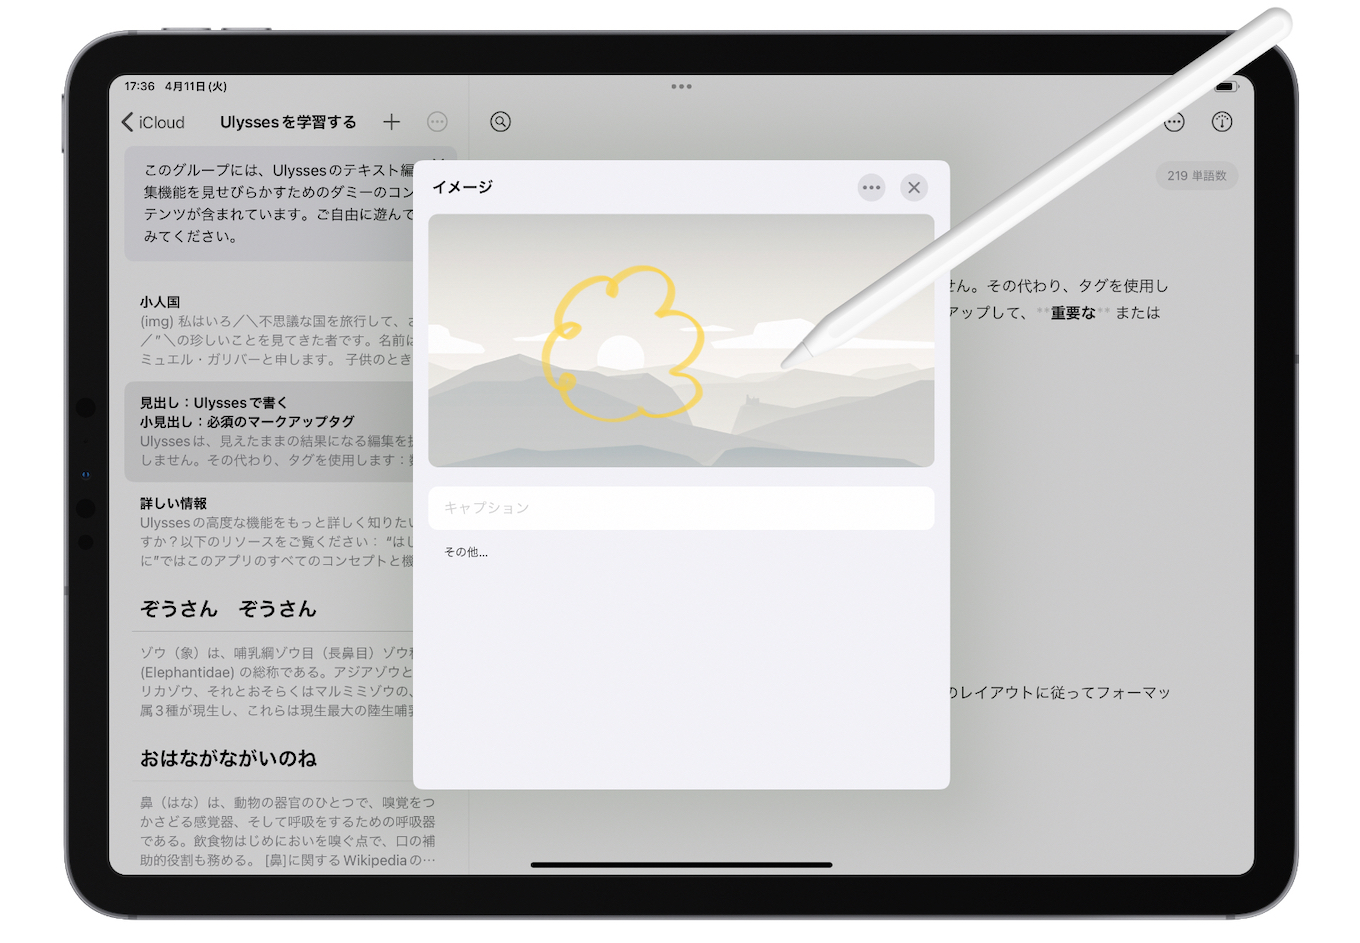 Ulysses v30 for iPad support Apple Pencil